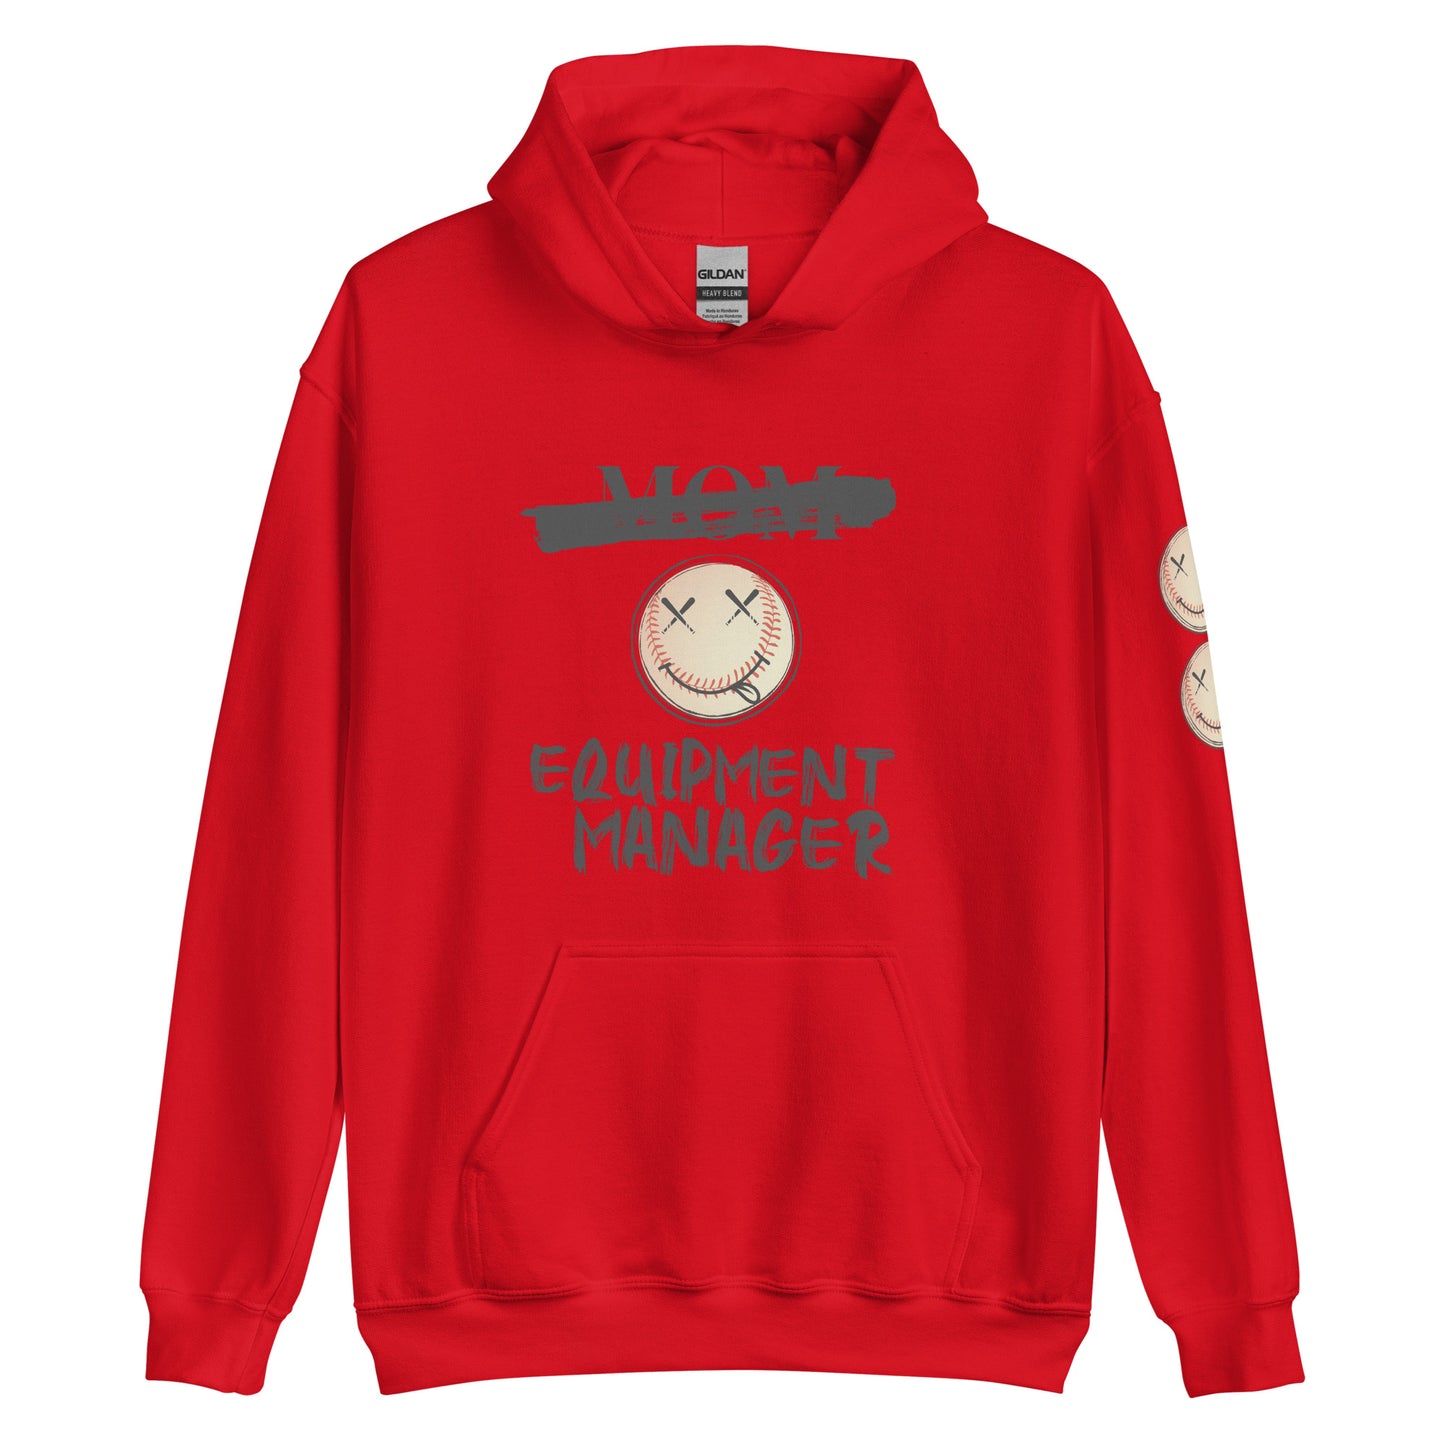 Equipment Manager Mom Hoodie